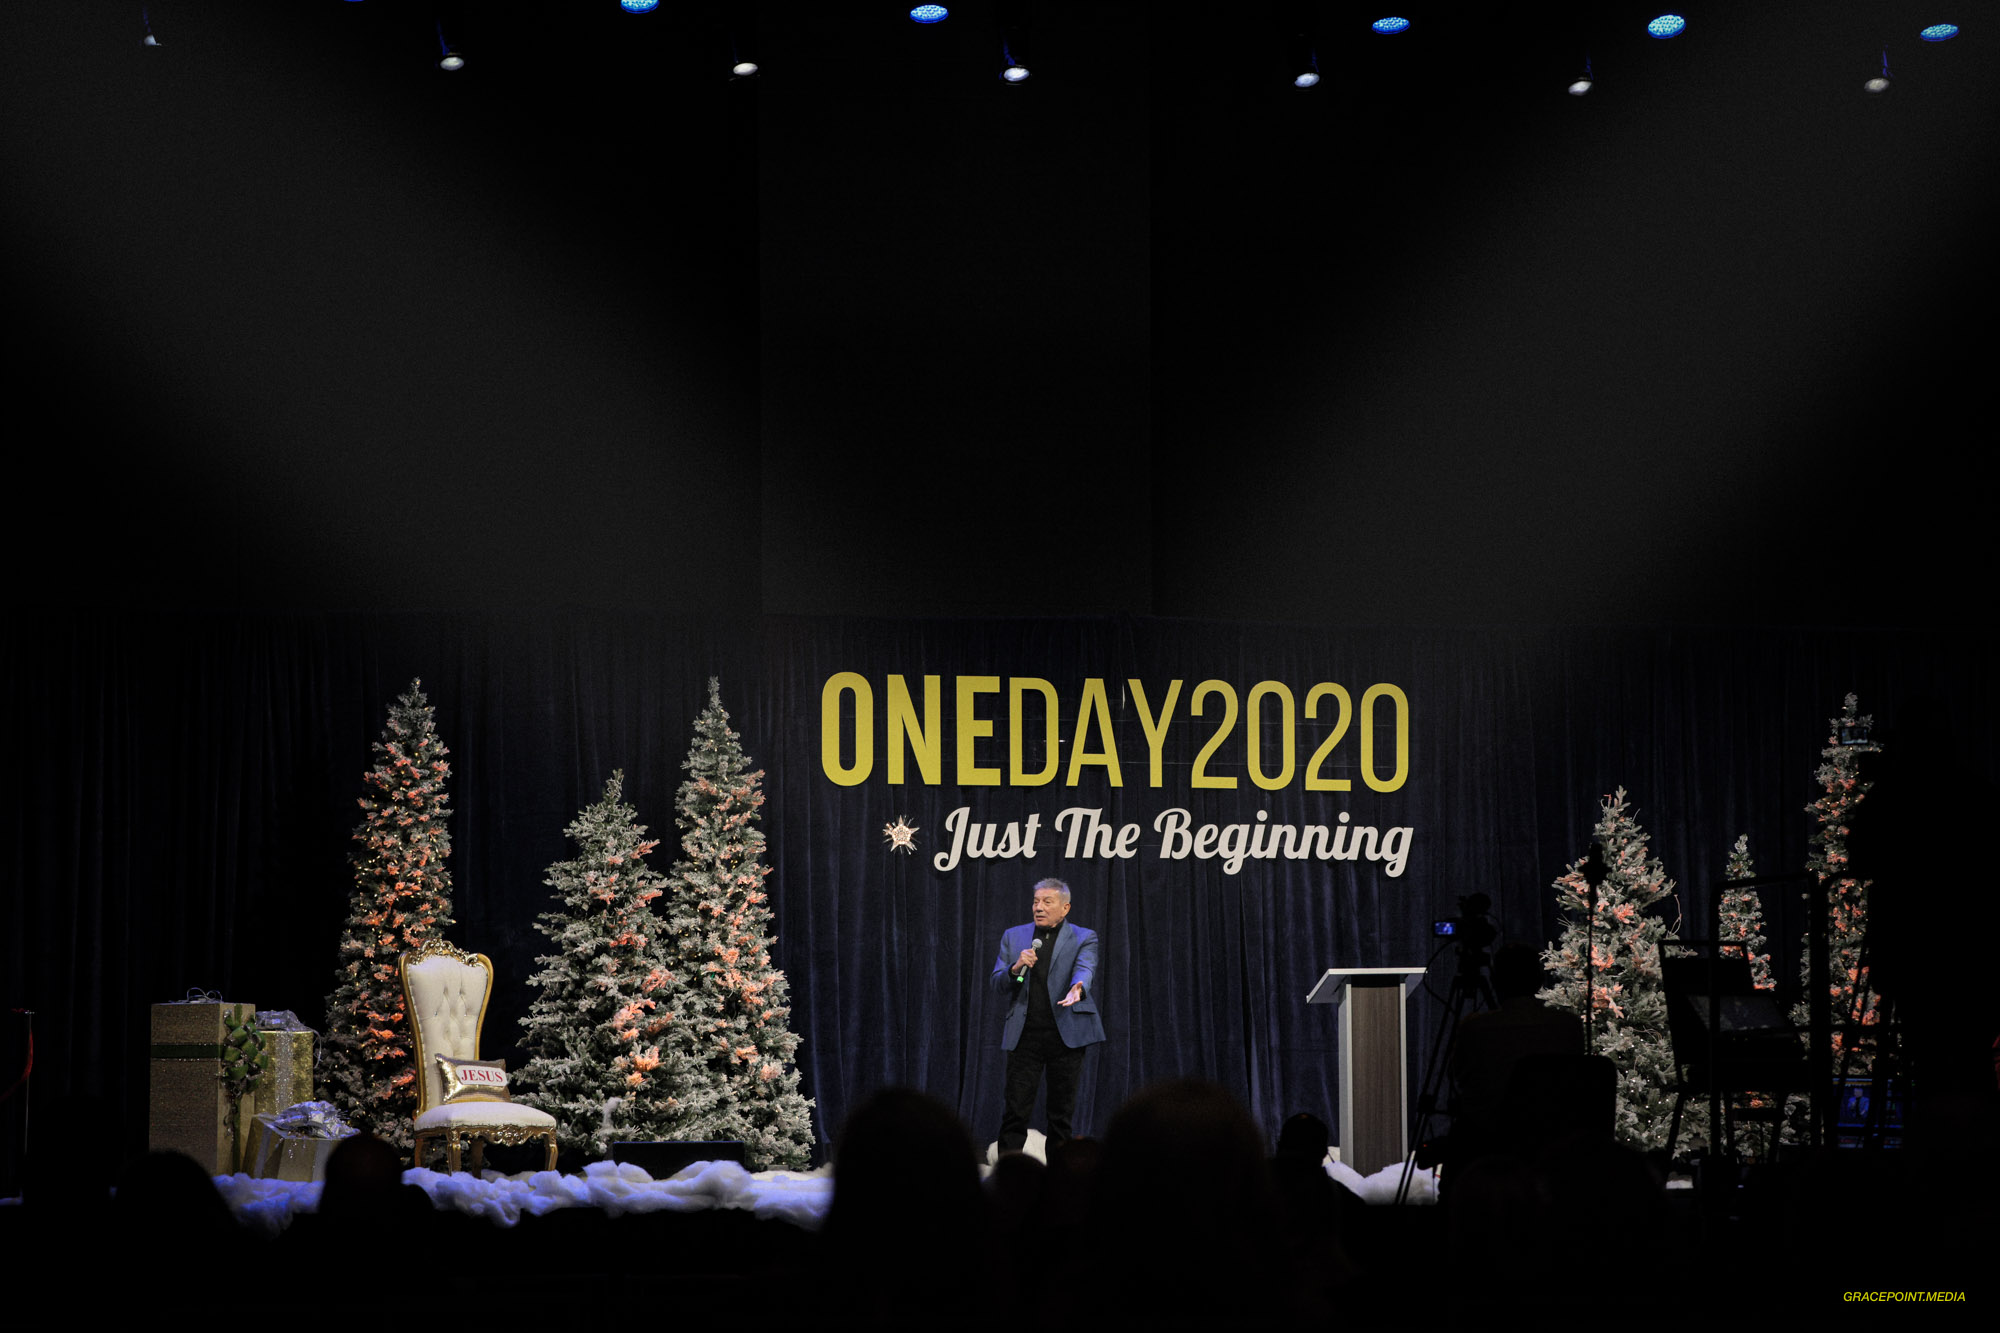 Homeless and Impoverished Receive Gifts During Operation Care International’s Global OneDay2020 Celebration